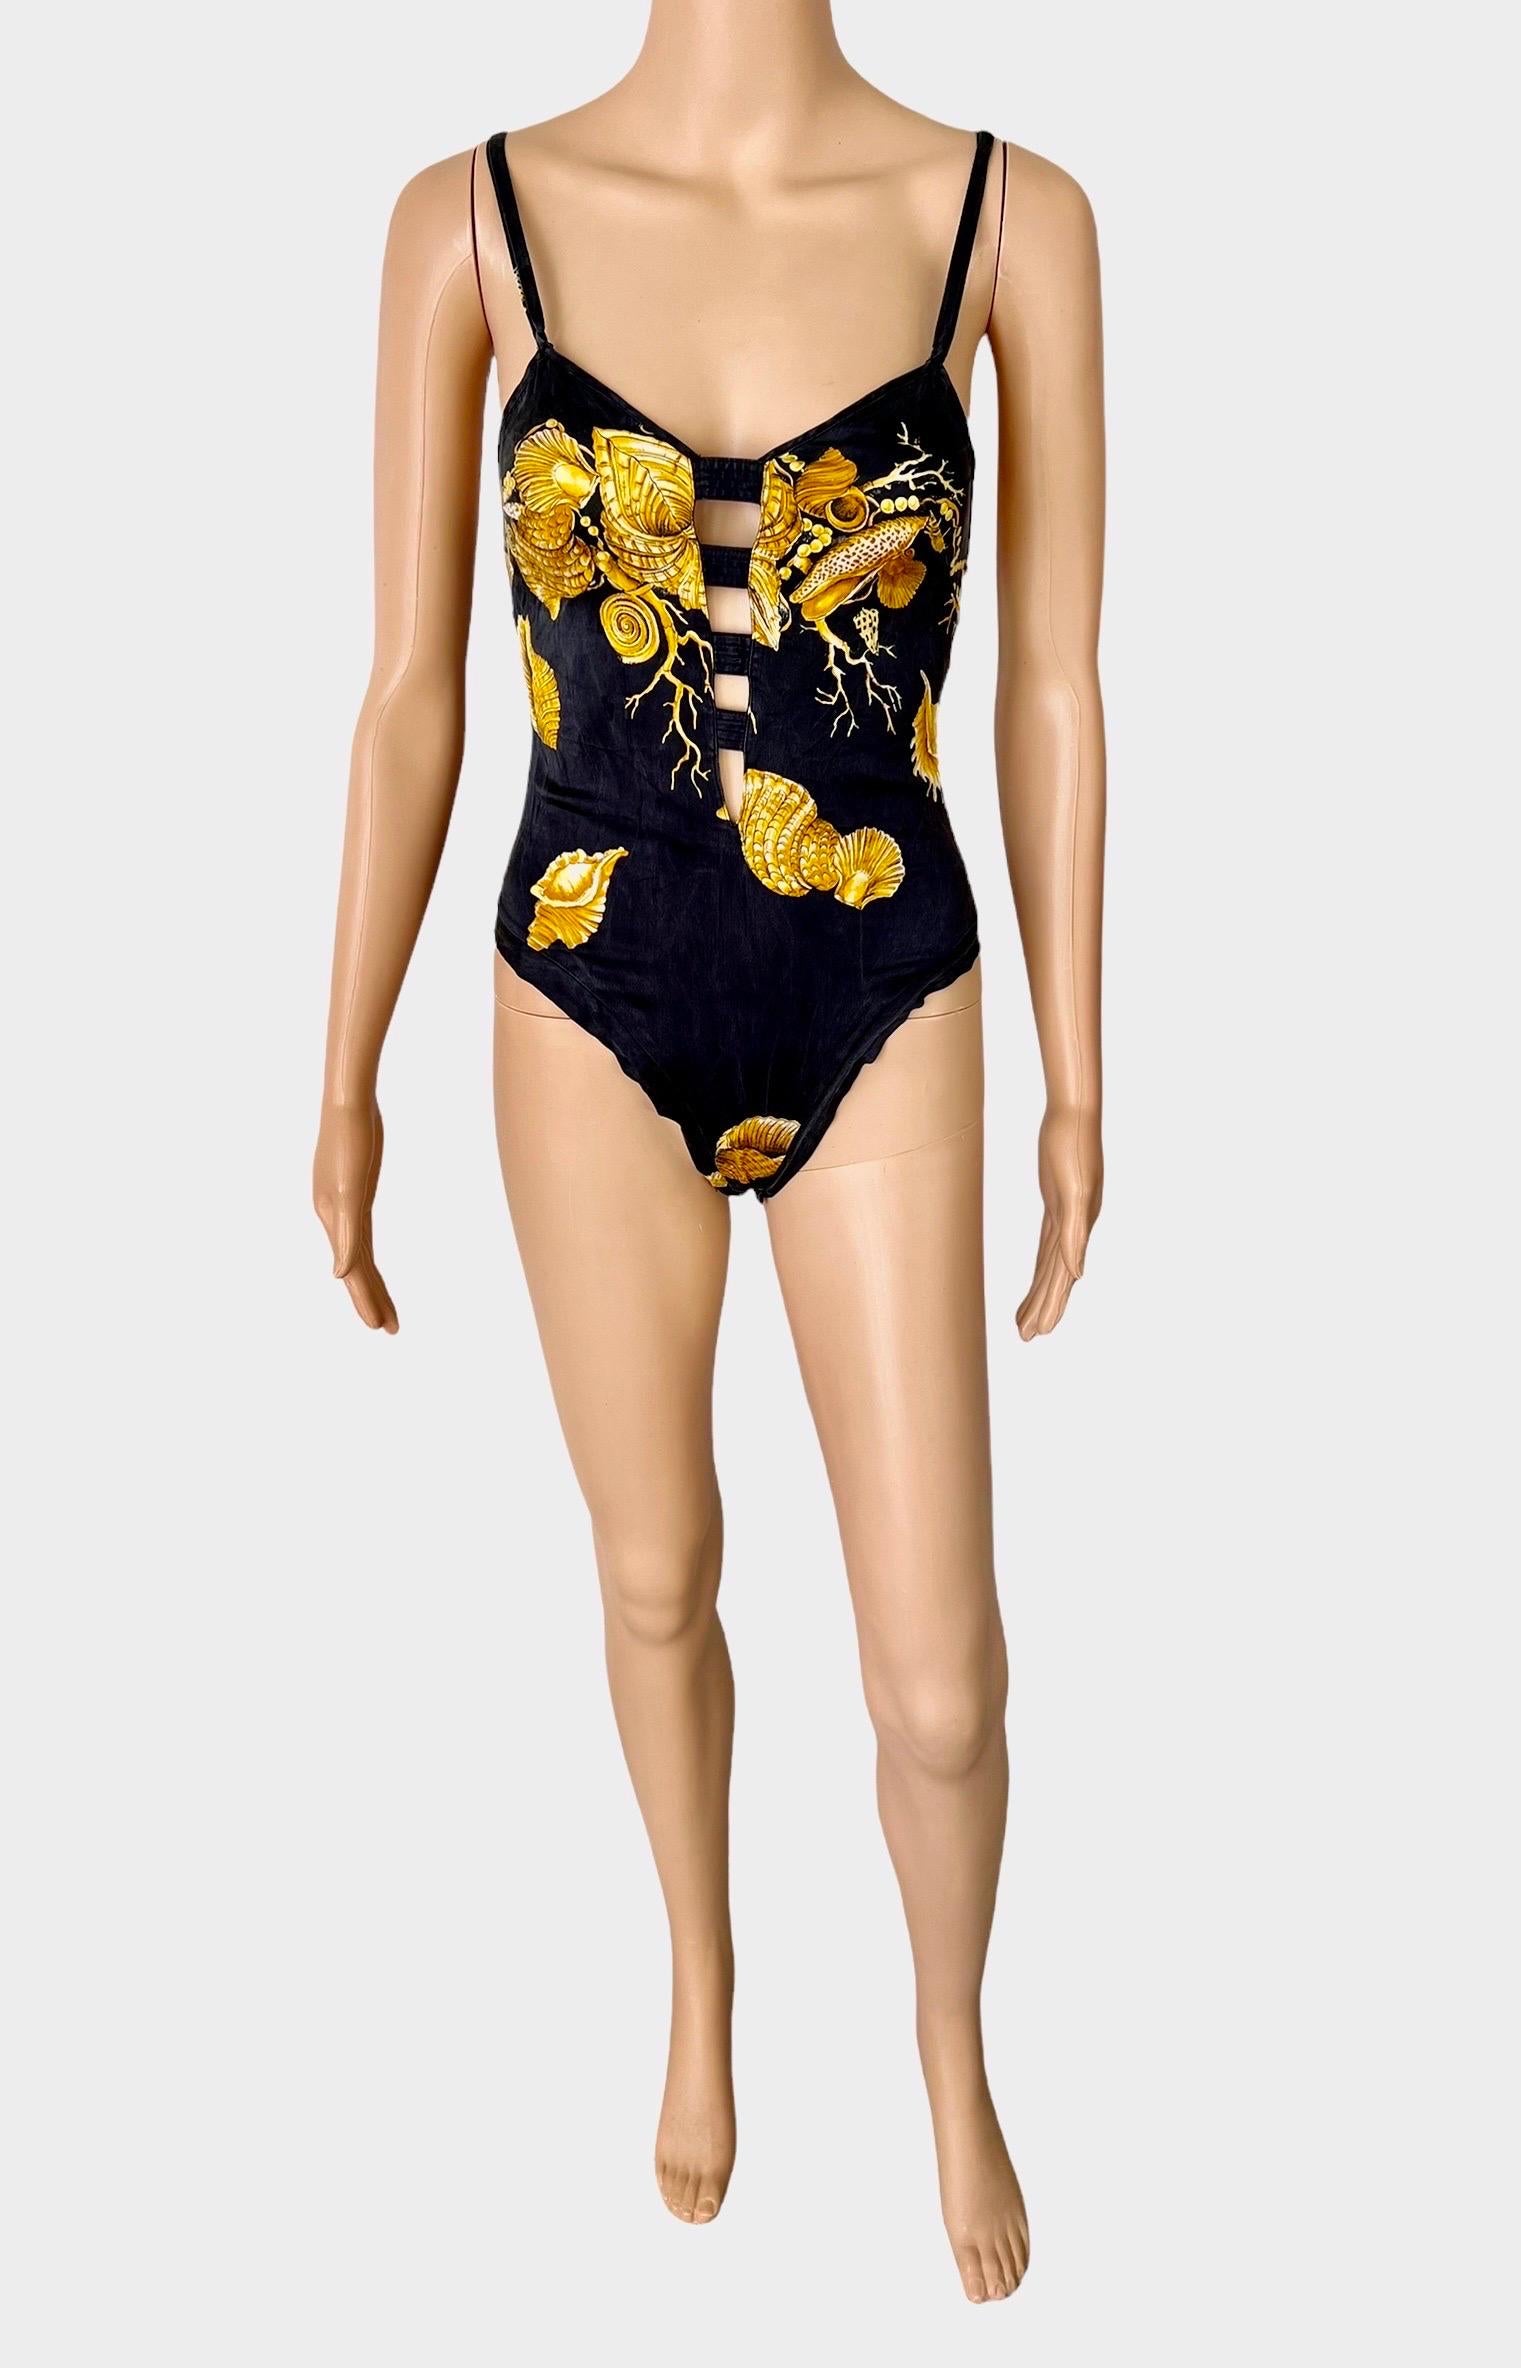 Gianni Versace S/S 1992 Vintage Plunging Baroque Print Sheer Lace Bodysuit Top  For Sale 1